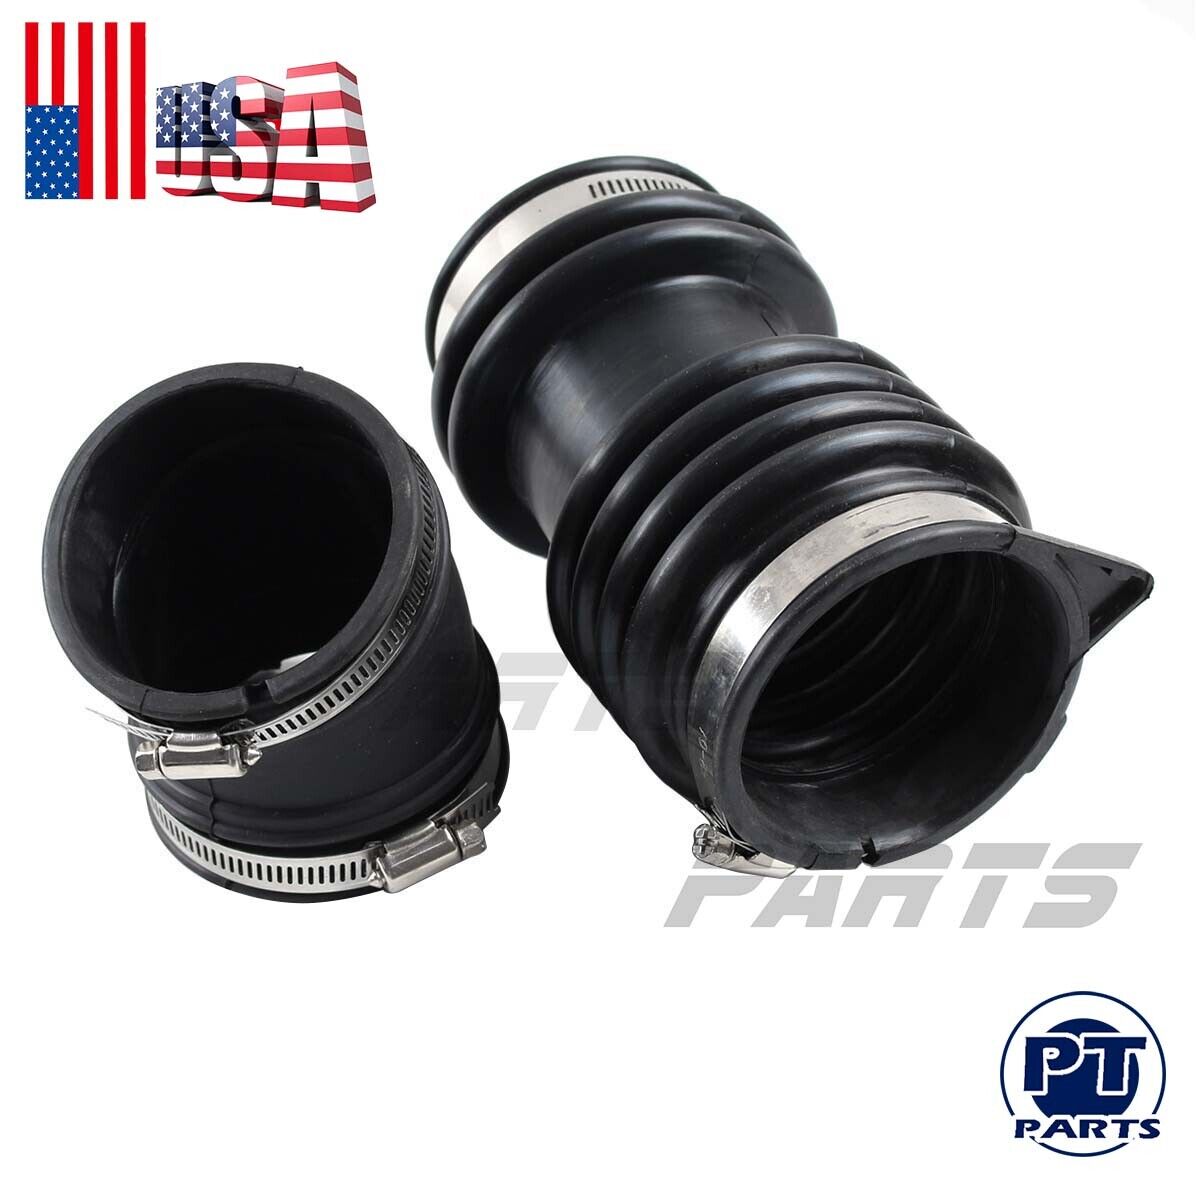 For Infiniti FX35 Air Intake Hose Tube Duct Boot 2003 2004 2005 2006 2007 2008